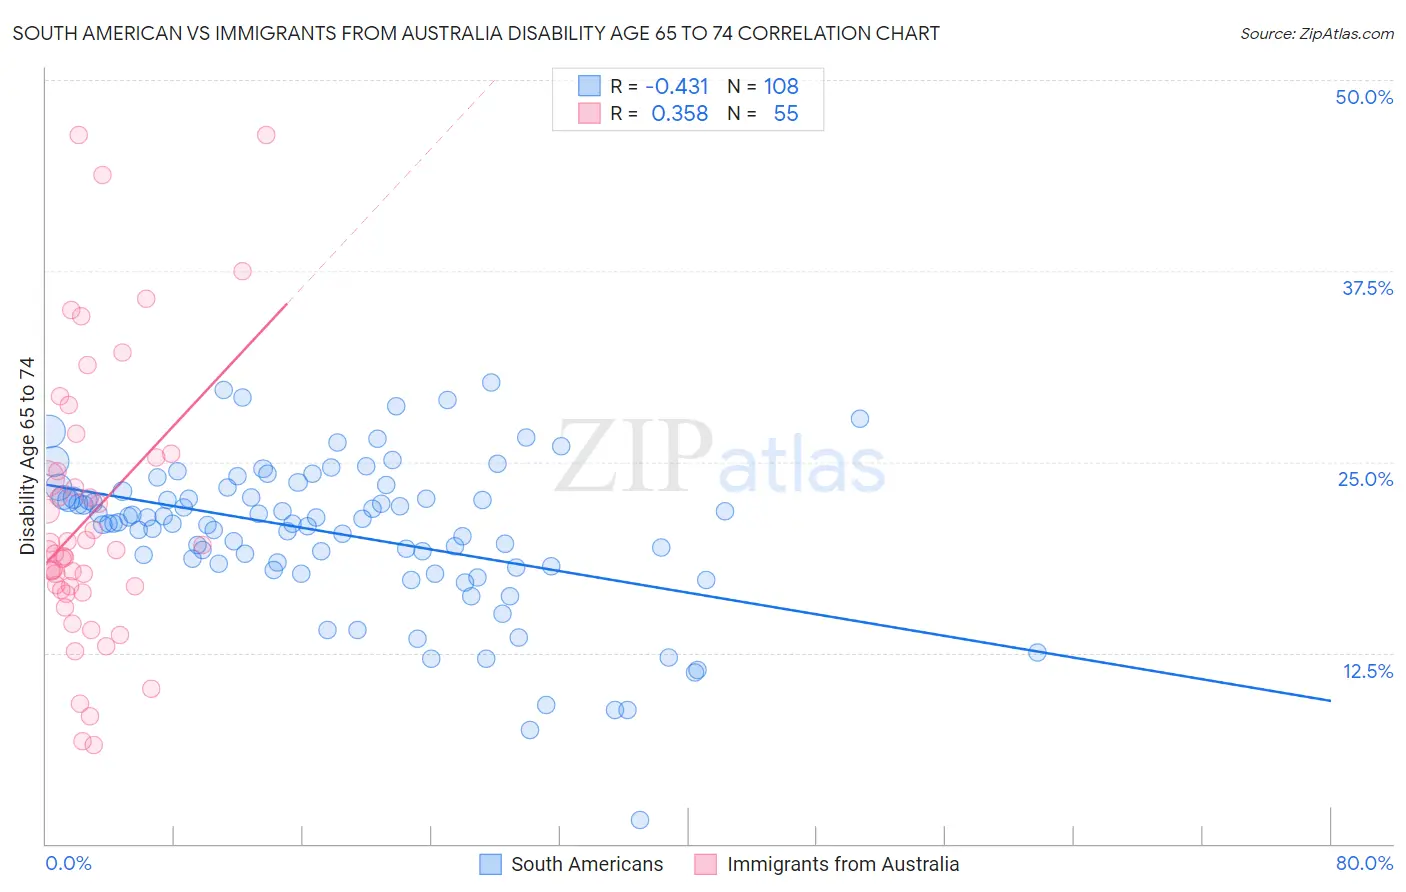 South American vs Immigrants from Australia Disability Age 65 to 74